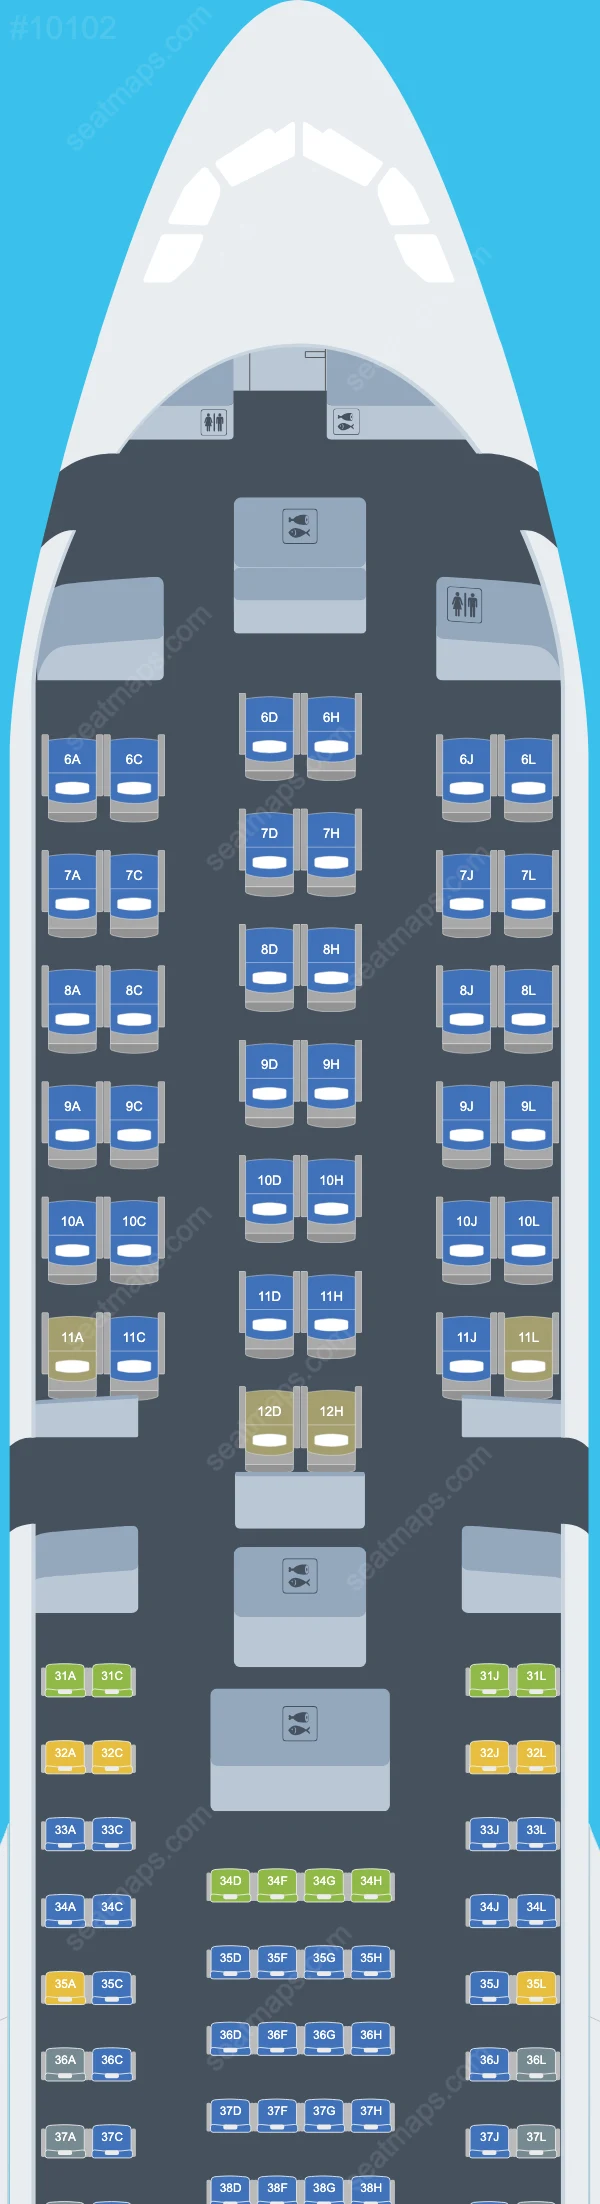 China Eastern Airbus A330-300 seatmap preview